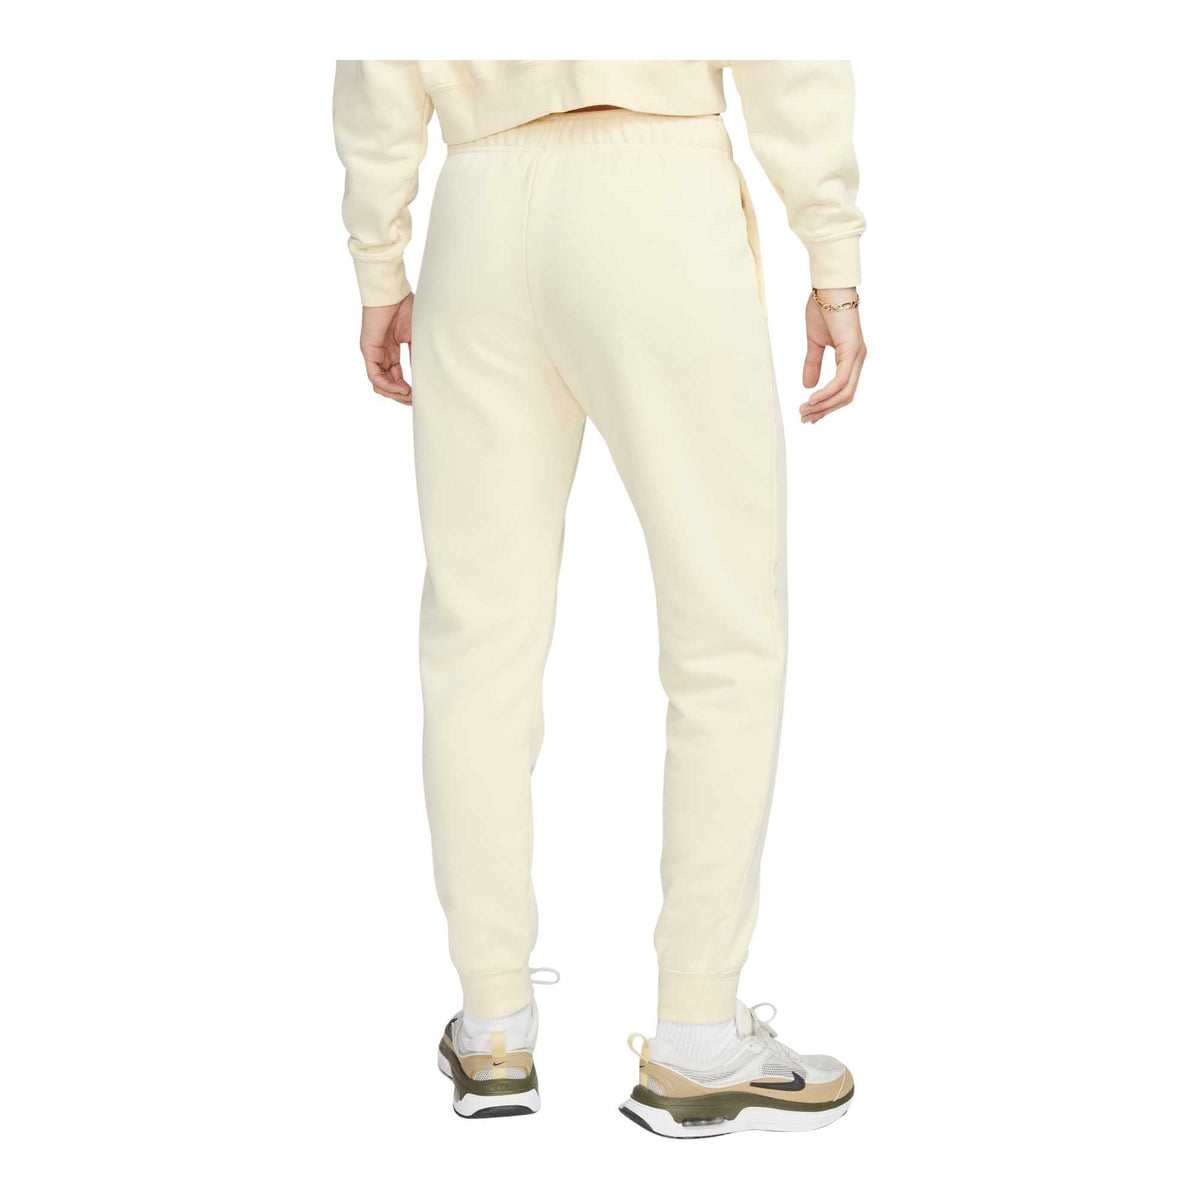 Ultimate Mid-Rise Joggers in Bone